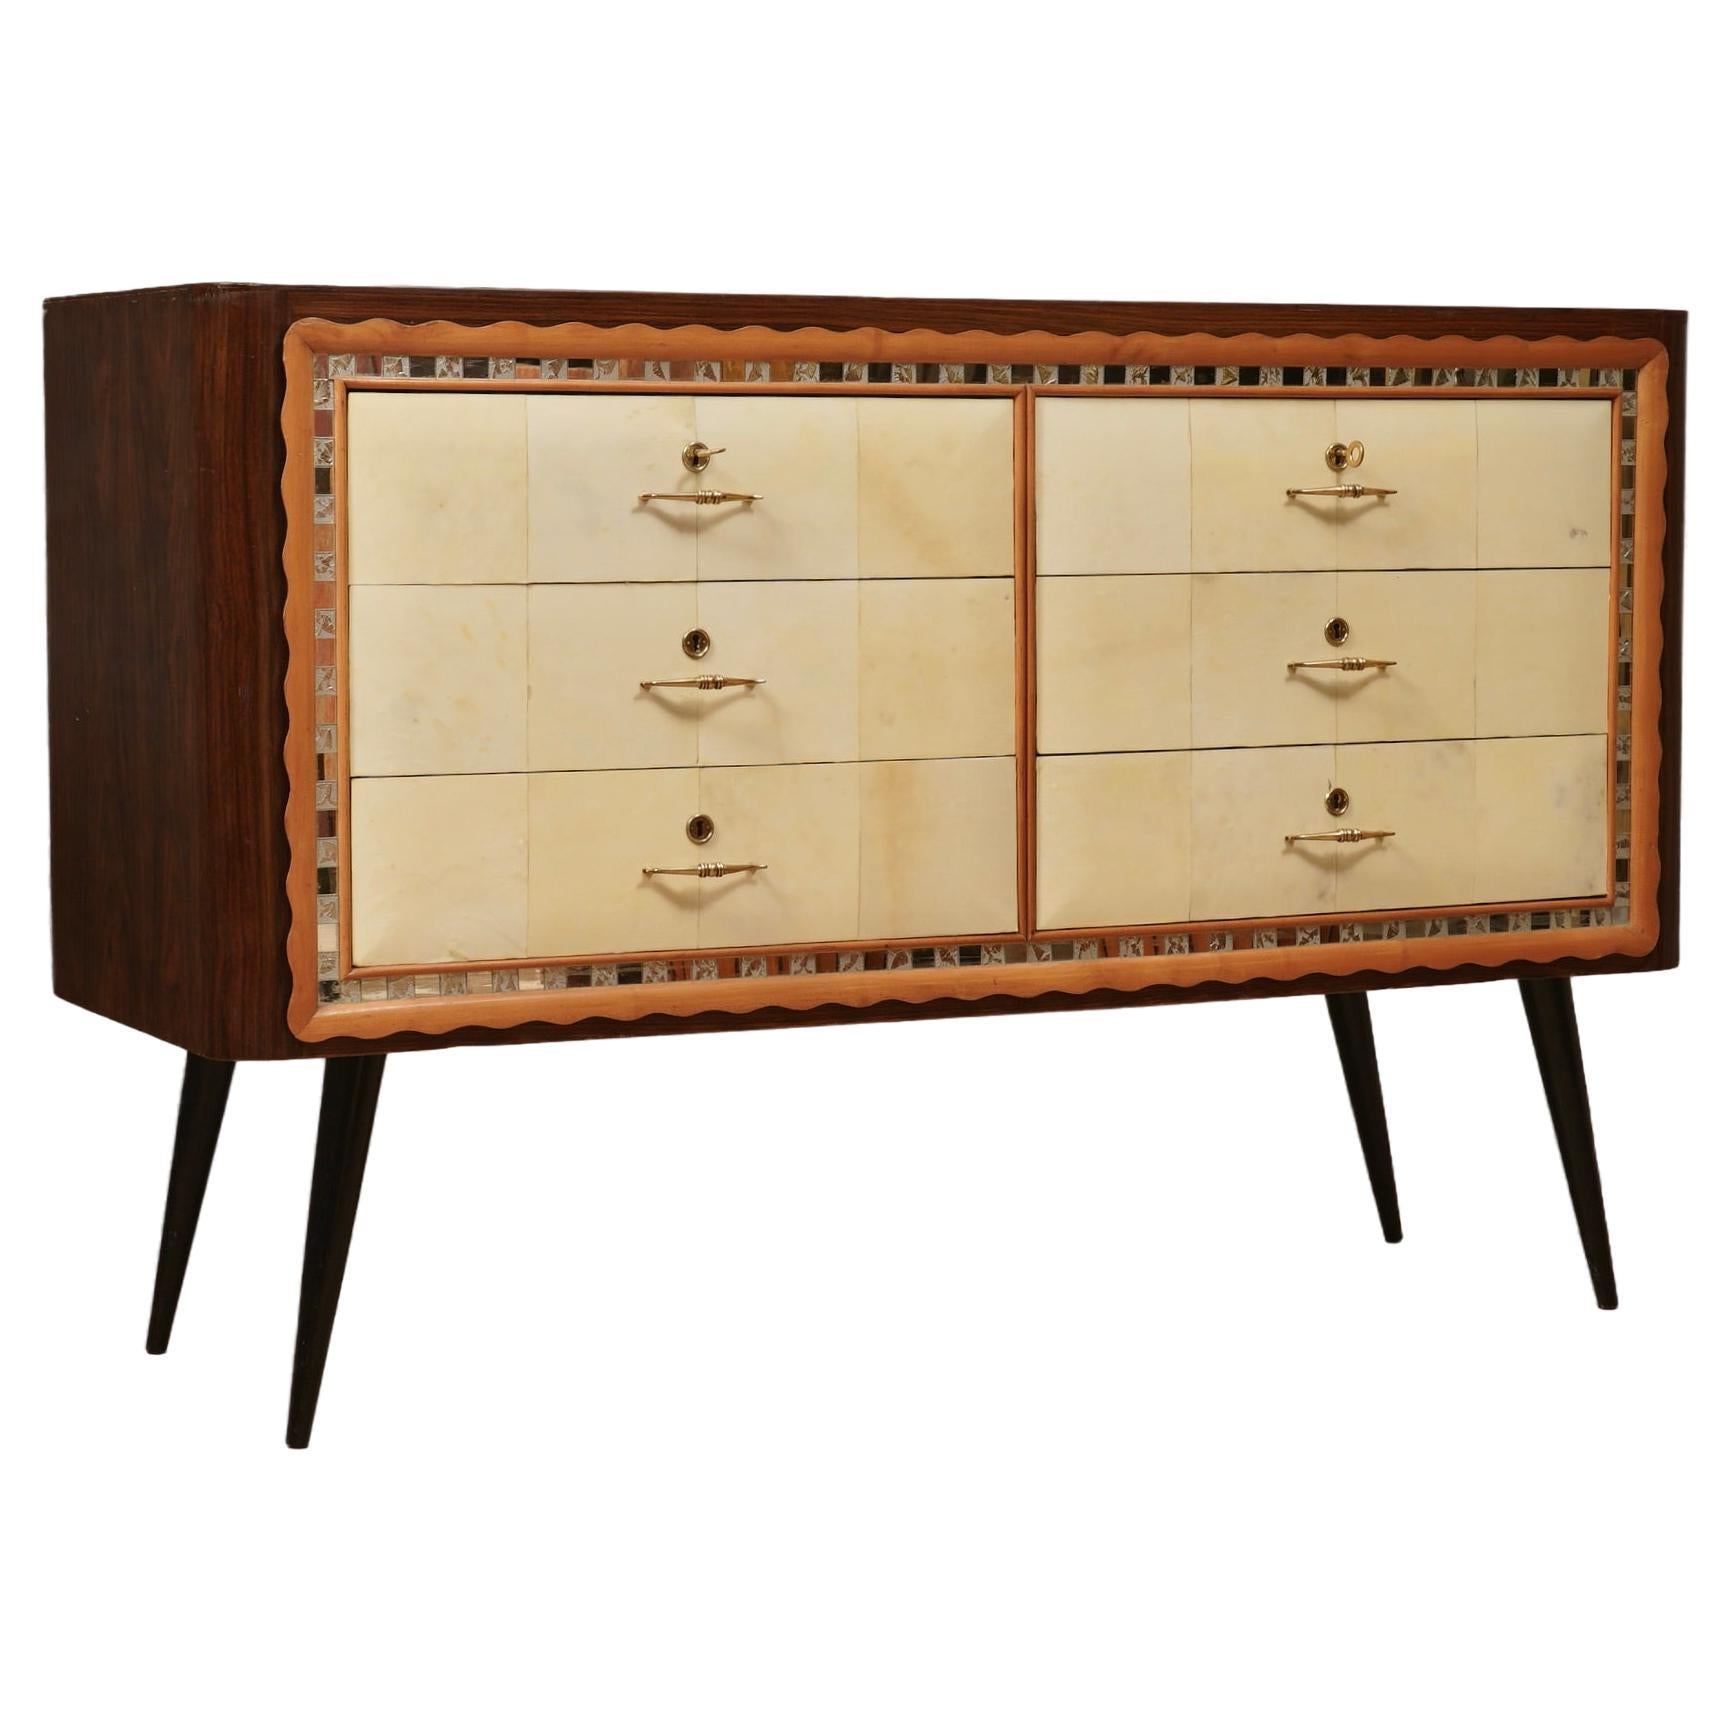 Art Deco Walnut Wood Goat Skin and Brass Italian Commode Chest of Drawers, 1950 For Sale